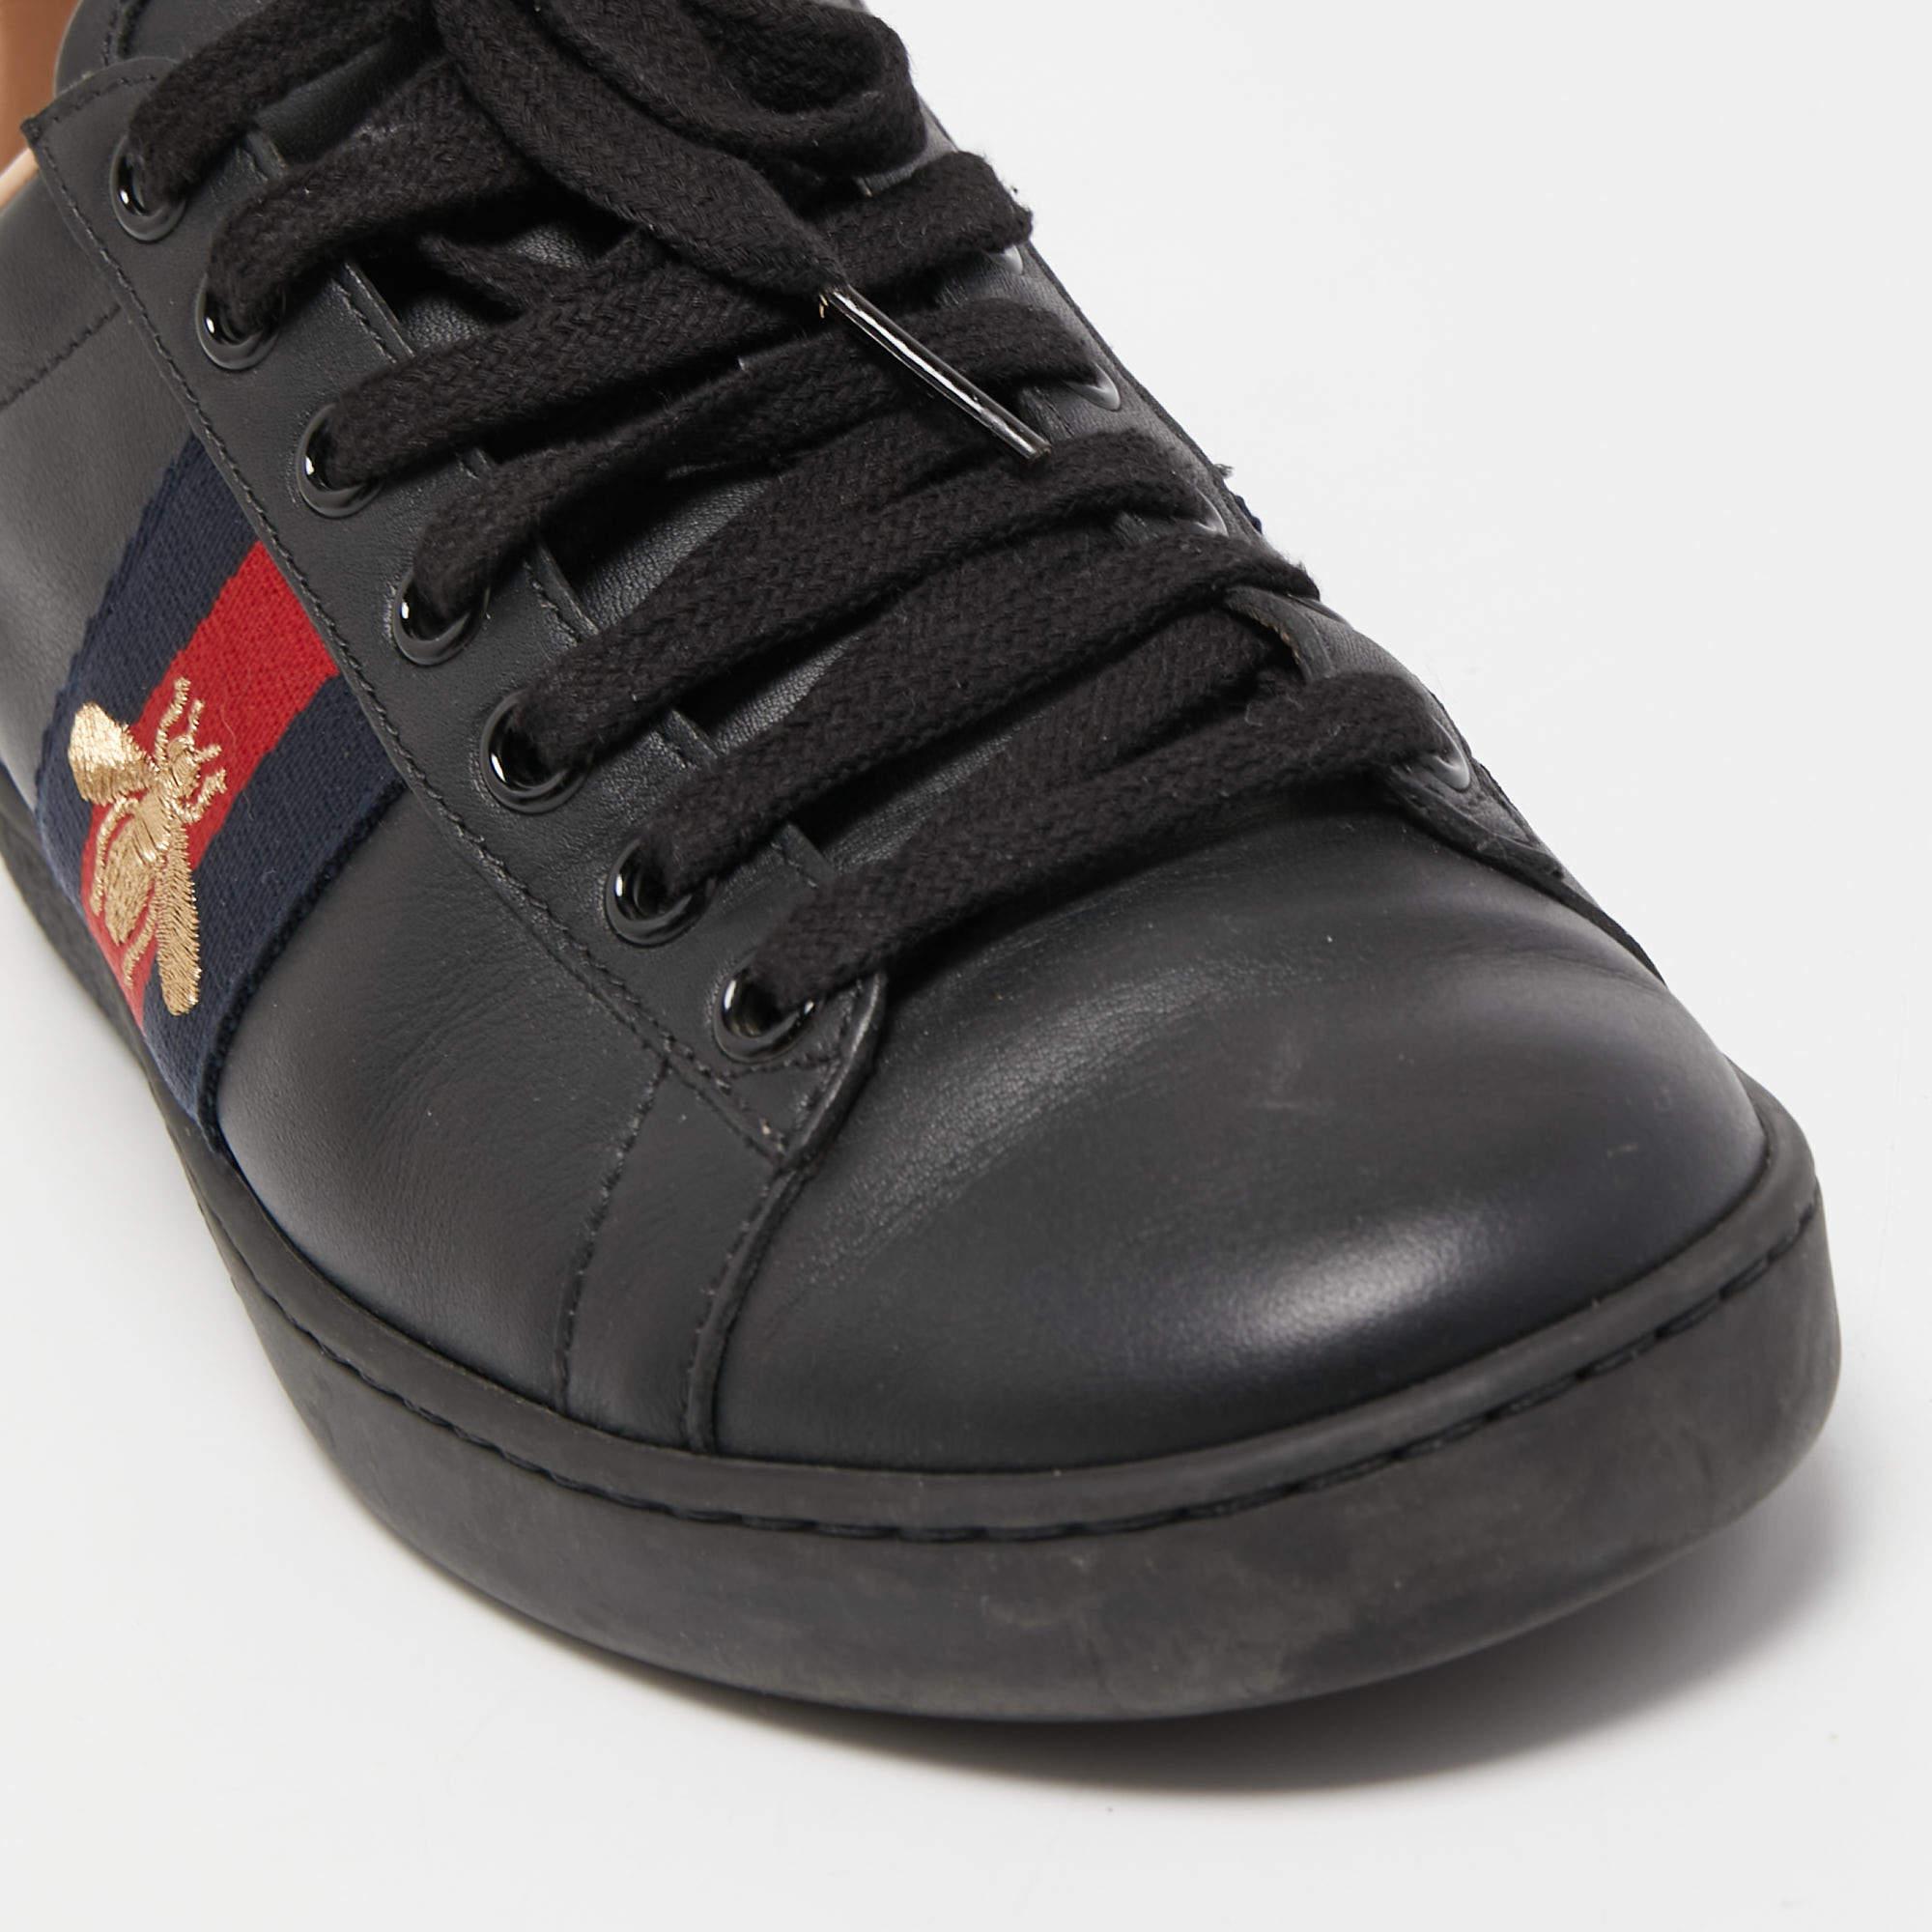 Gucci Black Leather Ace Web Low Top Sneakers Size 36 4